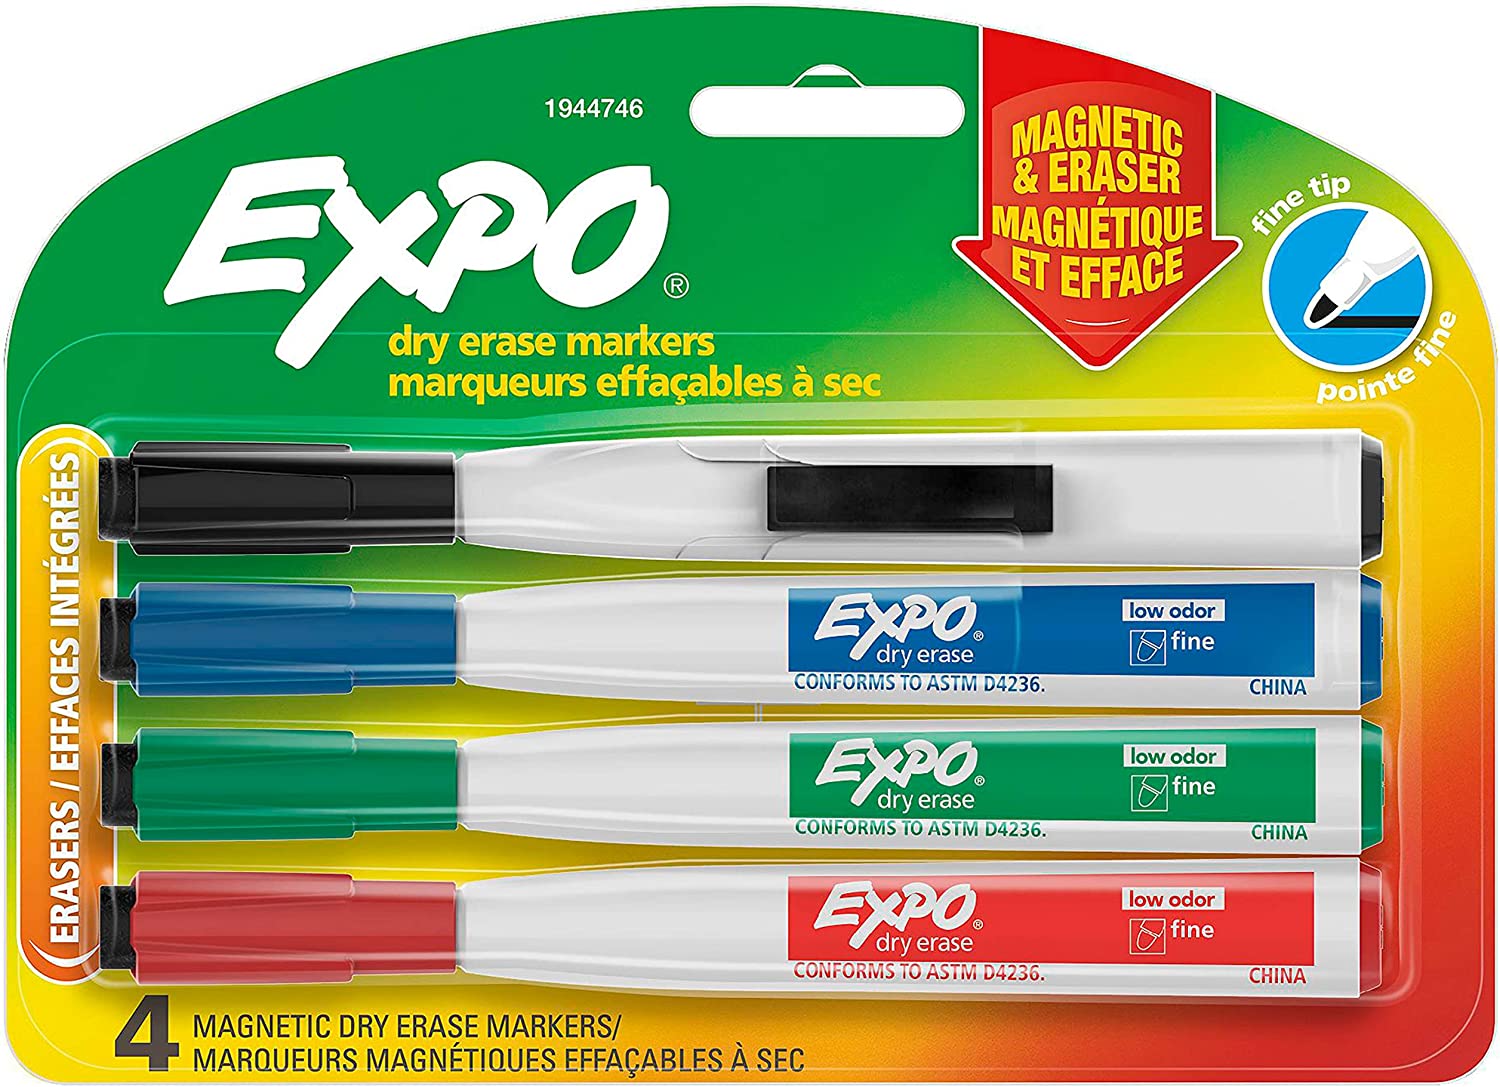 EXPO Magnetic Dry Erase Markers with Eraser, Fine Tip, Low Odor Ink, 4 Count, 4 Assorted Colors: Black, Red, Blue, Green